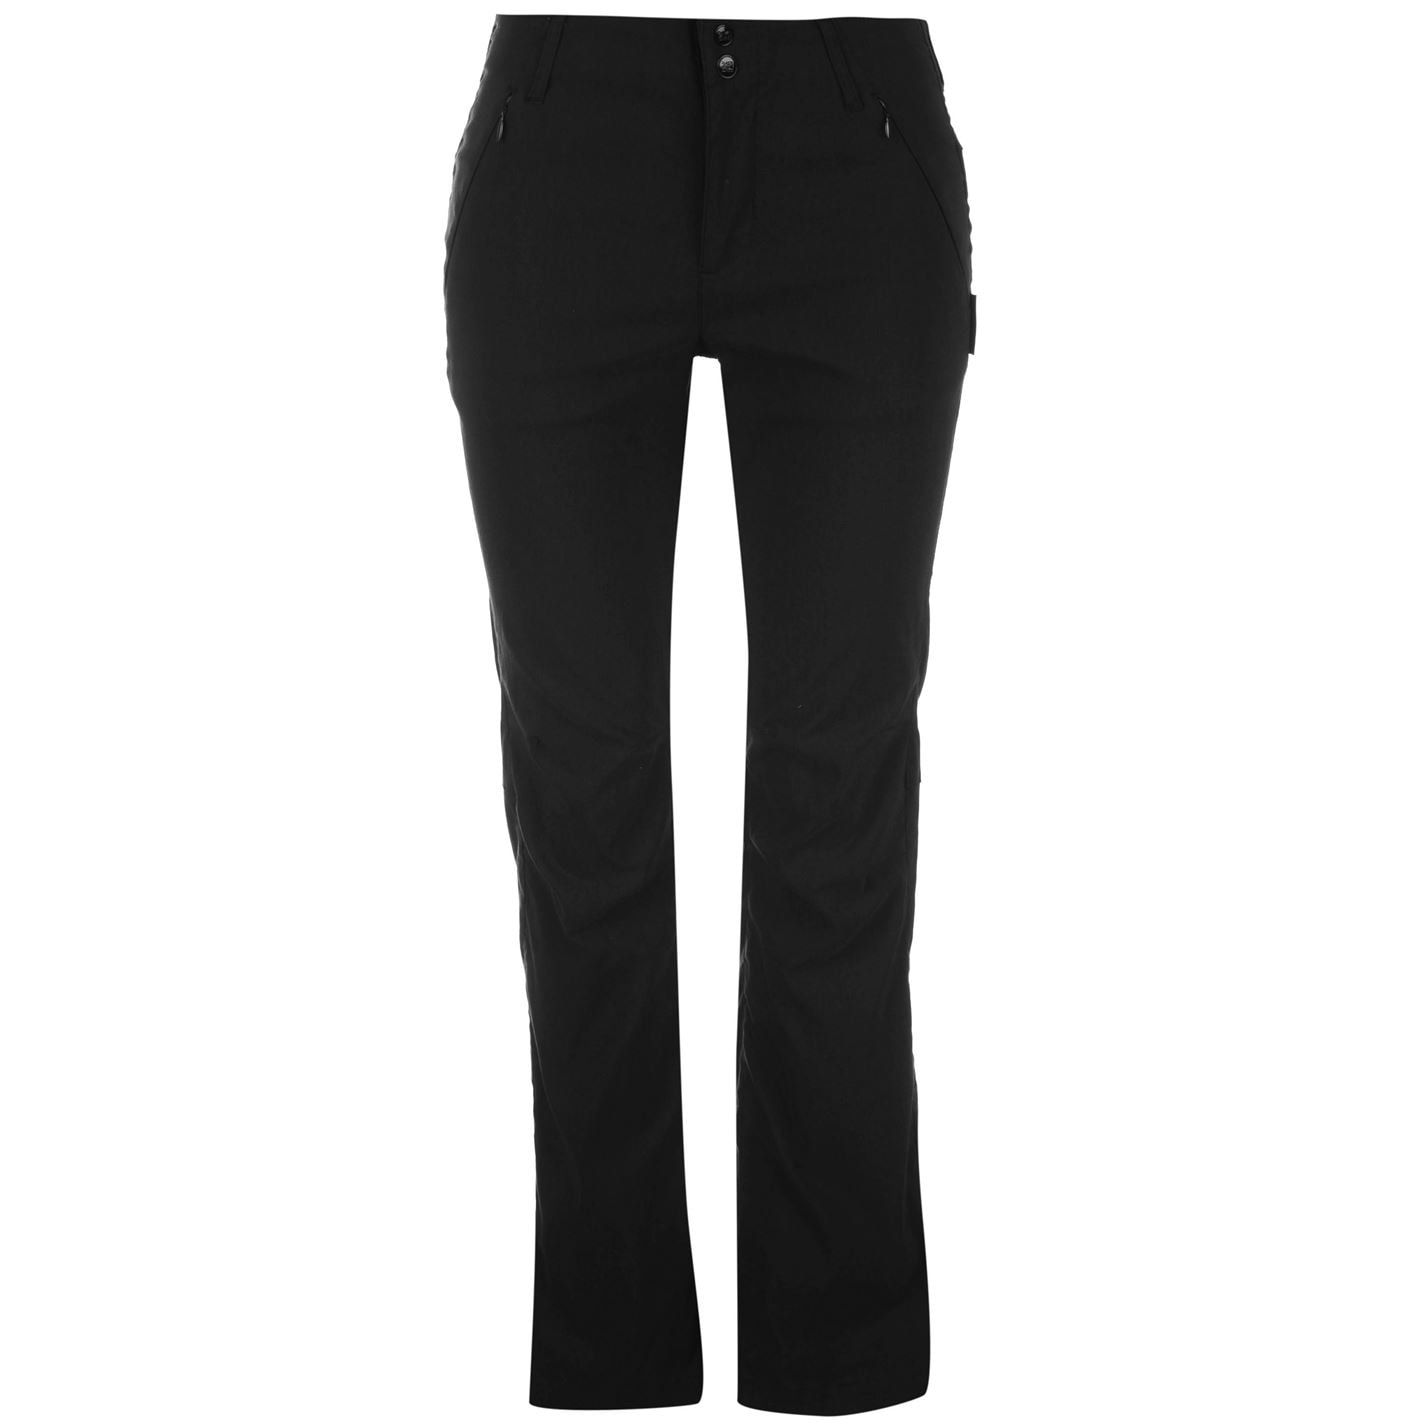 Karrimor Womens Ladies Panther Trousers Zip Fly Midweight Pants Bottoms